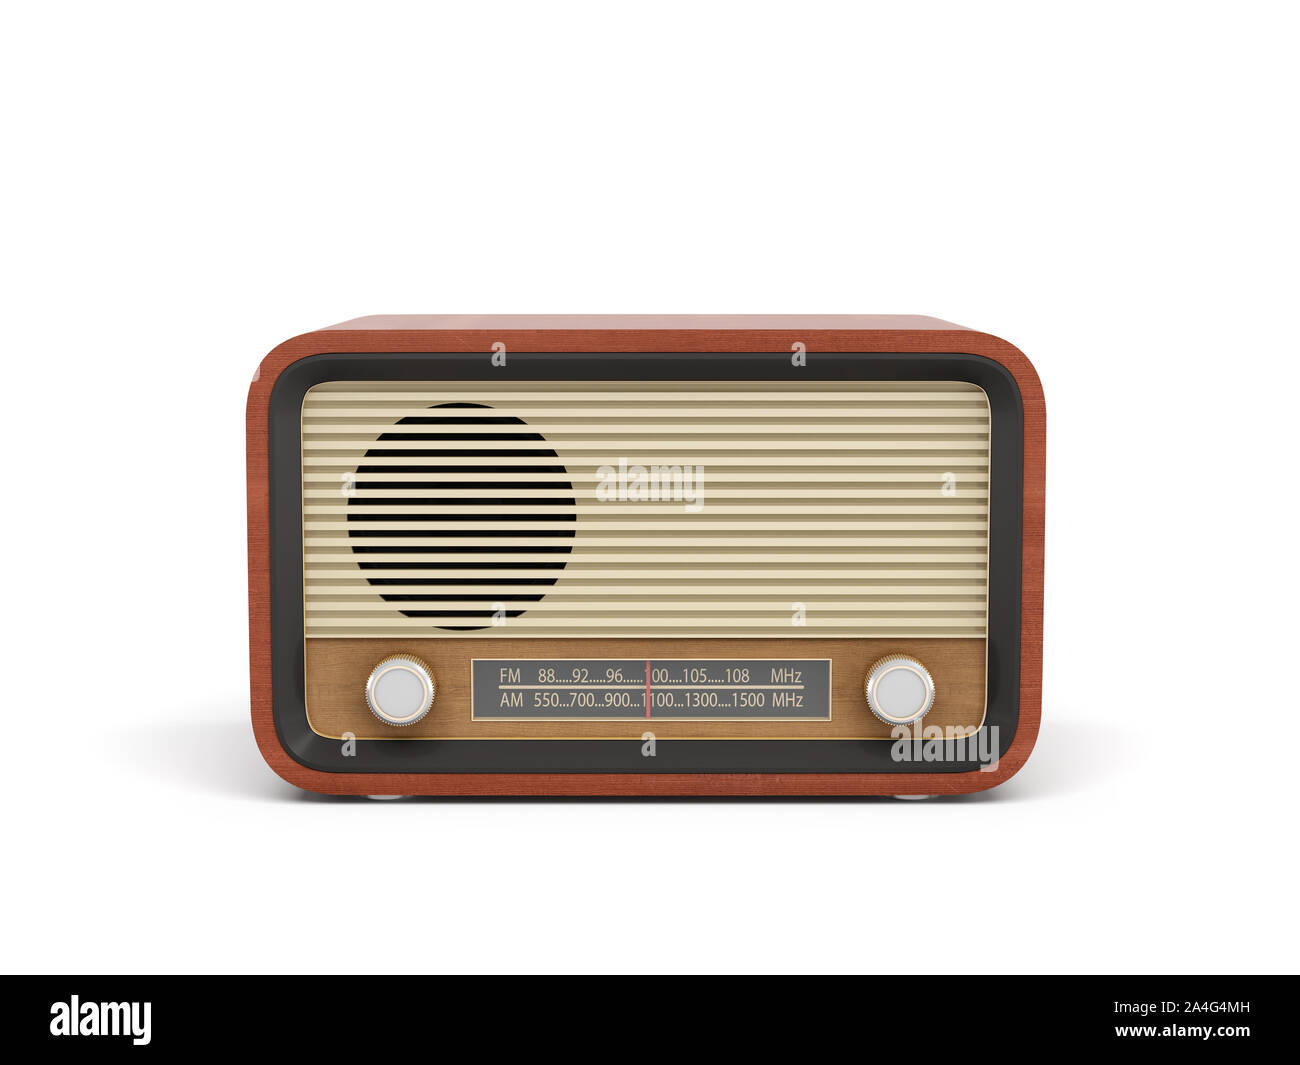 3d rendering of a brown rounded retro style radio receiver with an analogue  tuner. Means of communication. Reaching audience. Radio shows Stock Photo -  Alamy